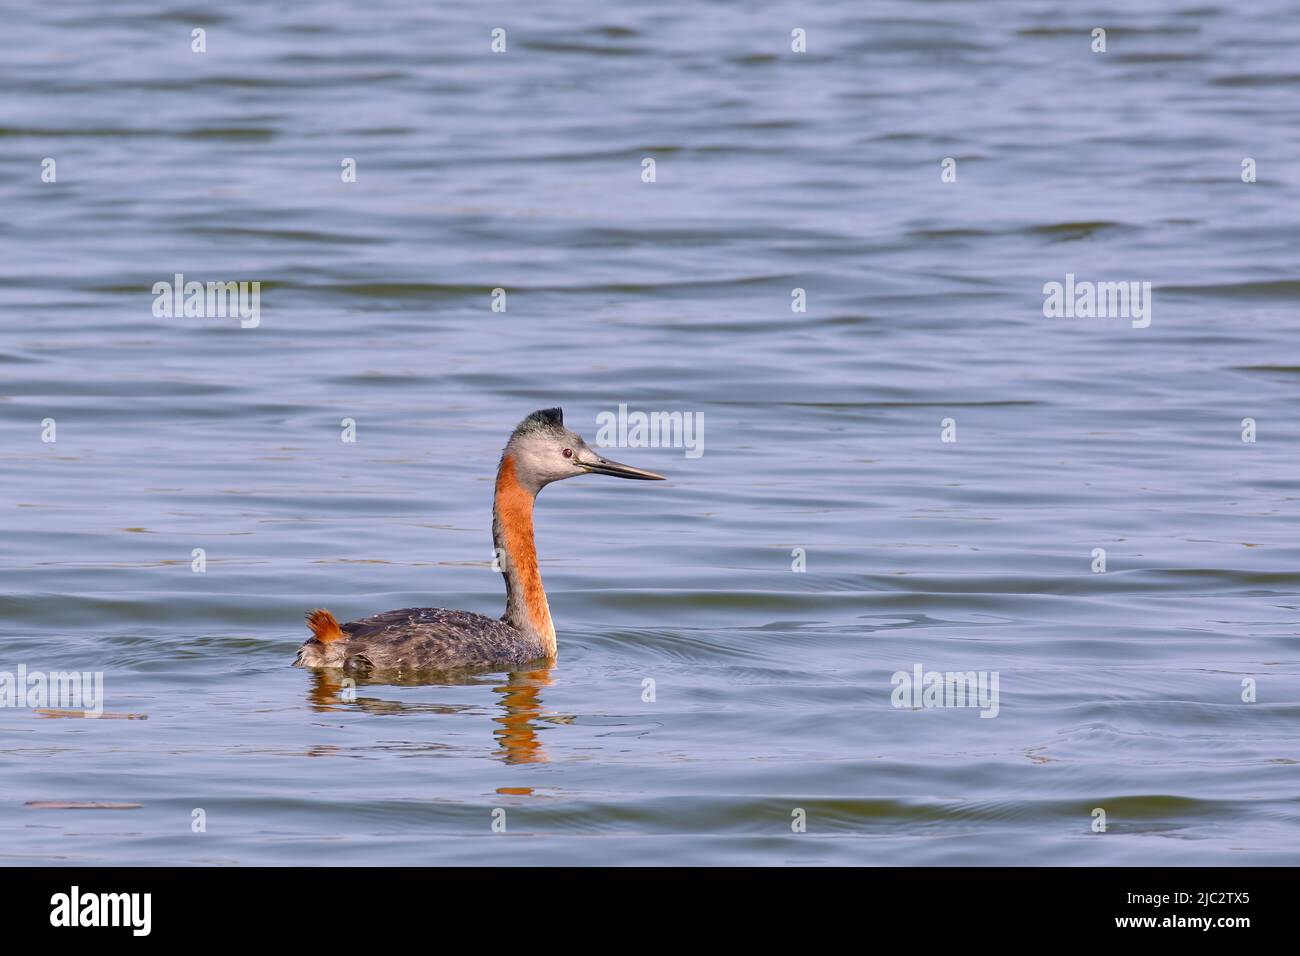 Great Grebe (Podiceps major), the largest of the grebes swimming alone in a lagoon. Stock Photo